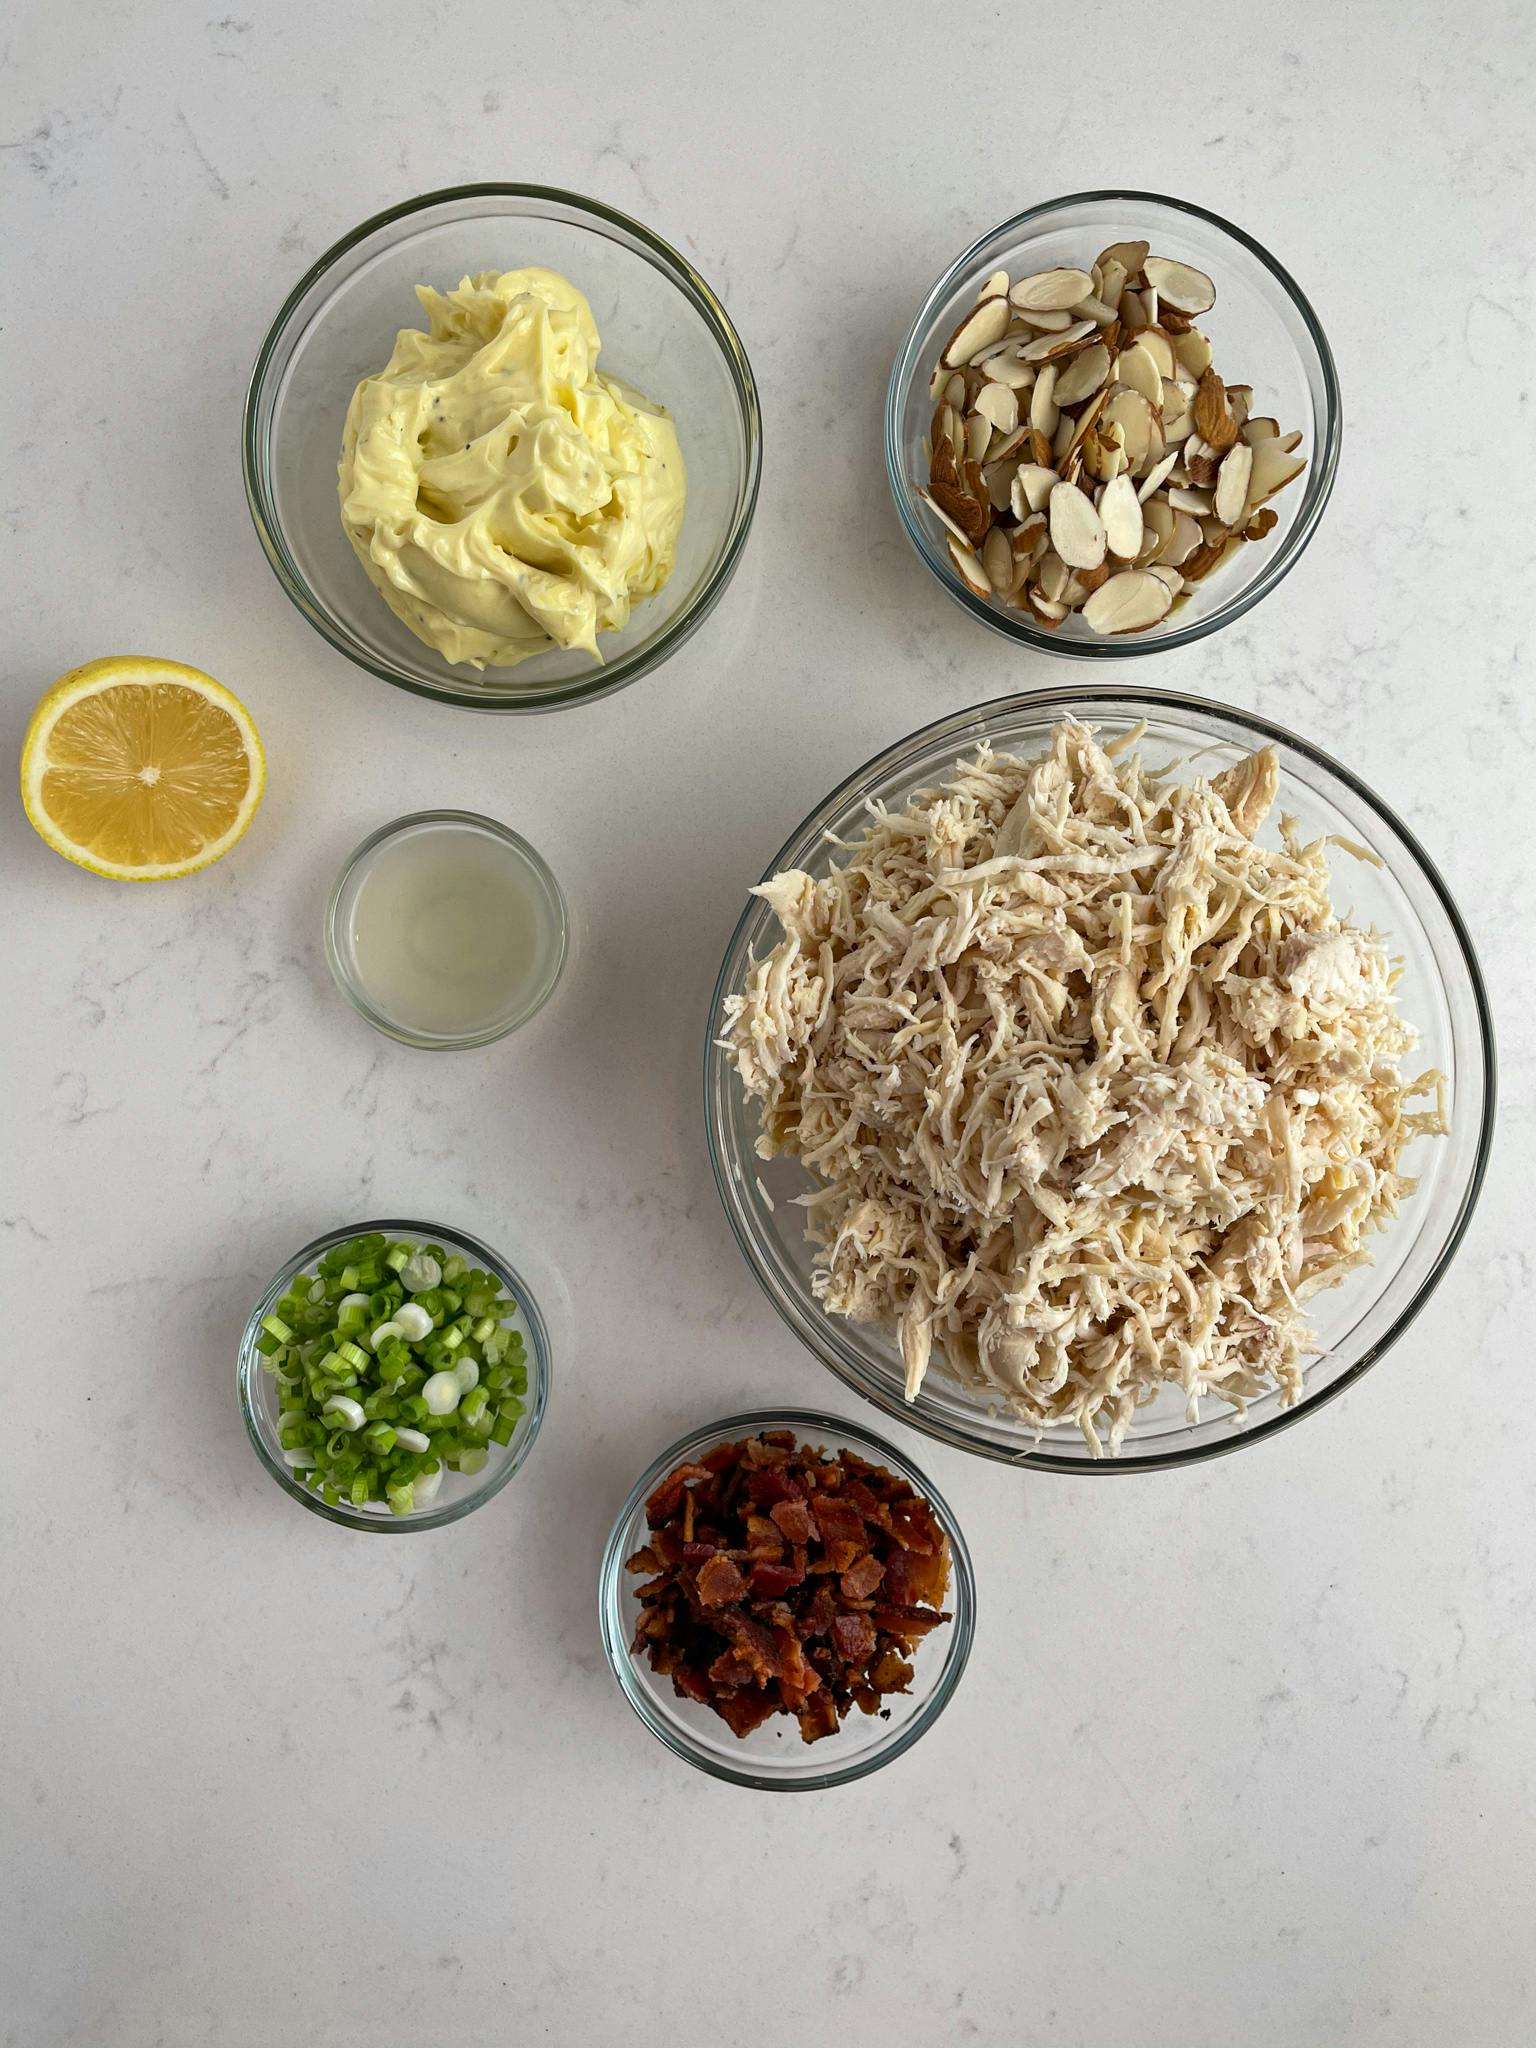 Chicken salad ingredients laid out on table